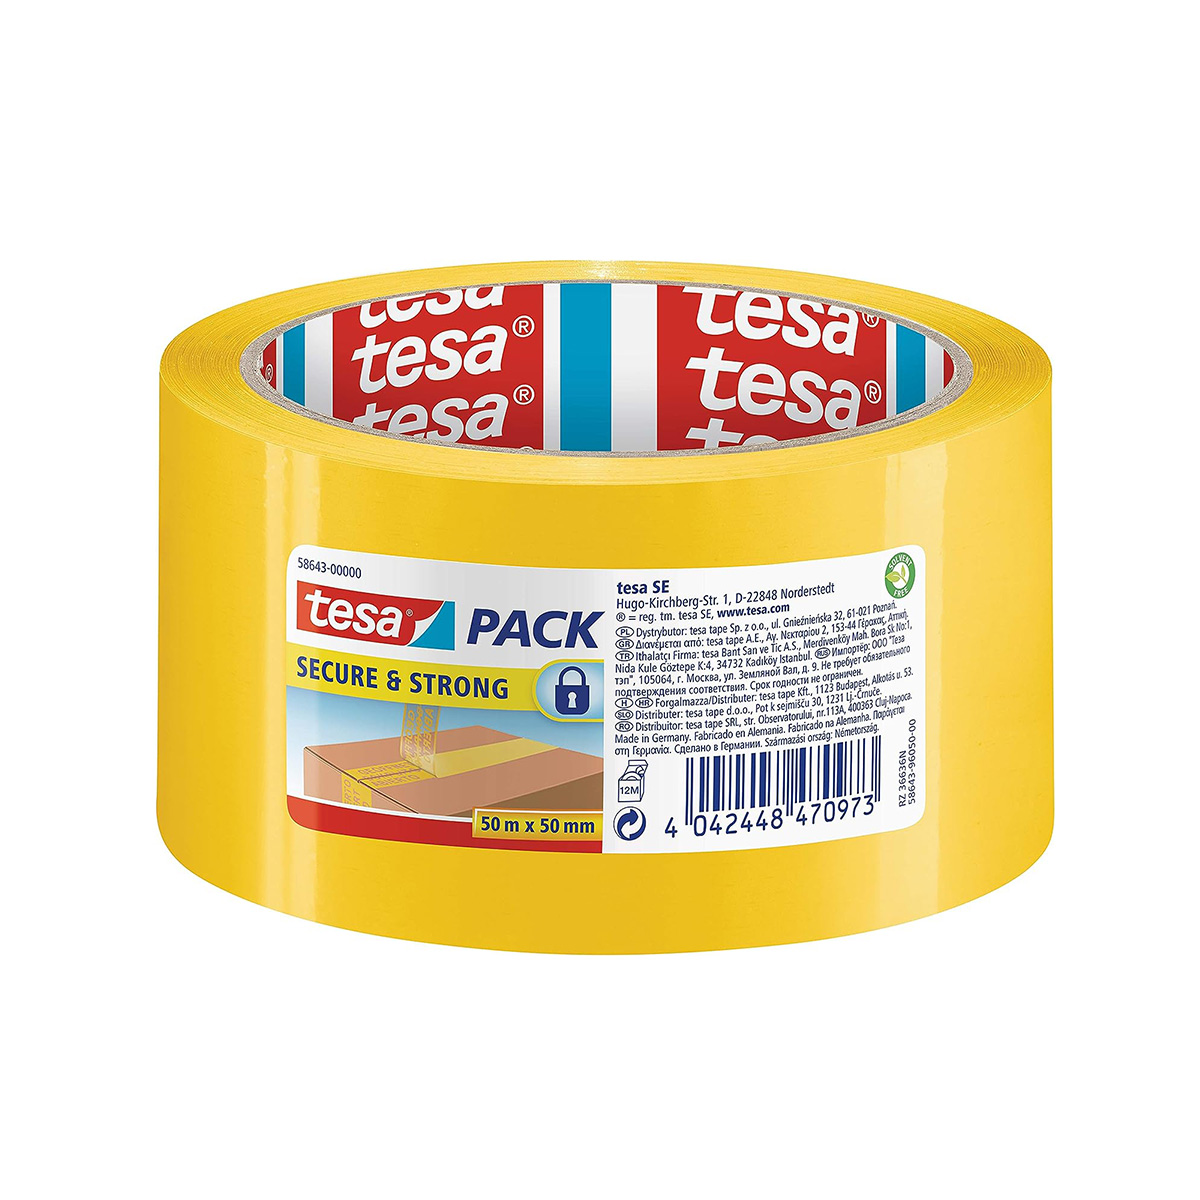 tesapack Secure & Strong 50 mm x 50 m packaging tape with sealing effect yellow